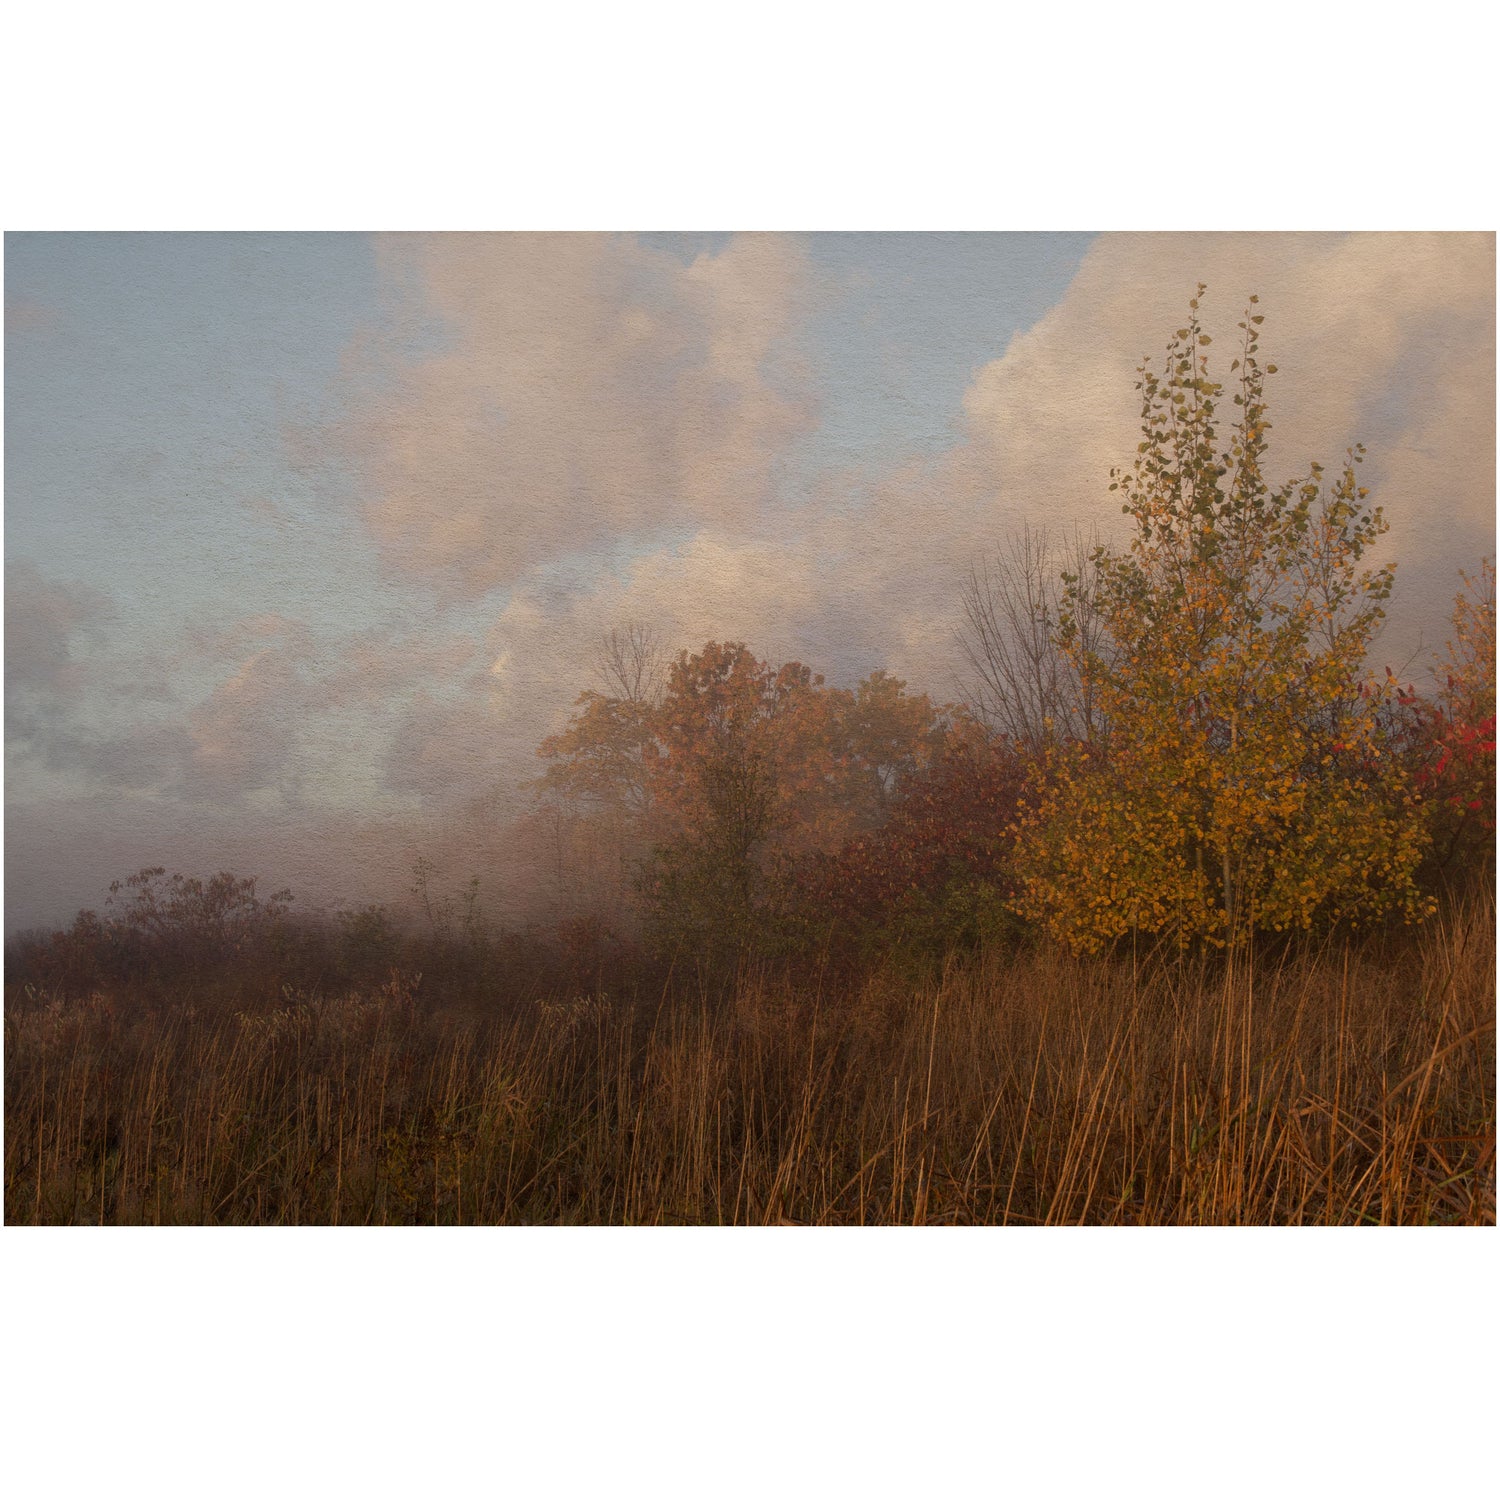 The 'Foggy Fall Prairie' artwork is an autumnal image that effortlessly combines wall art with nature photography, encapsulating the tranquil vibe of a prairie setting.